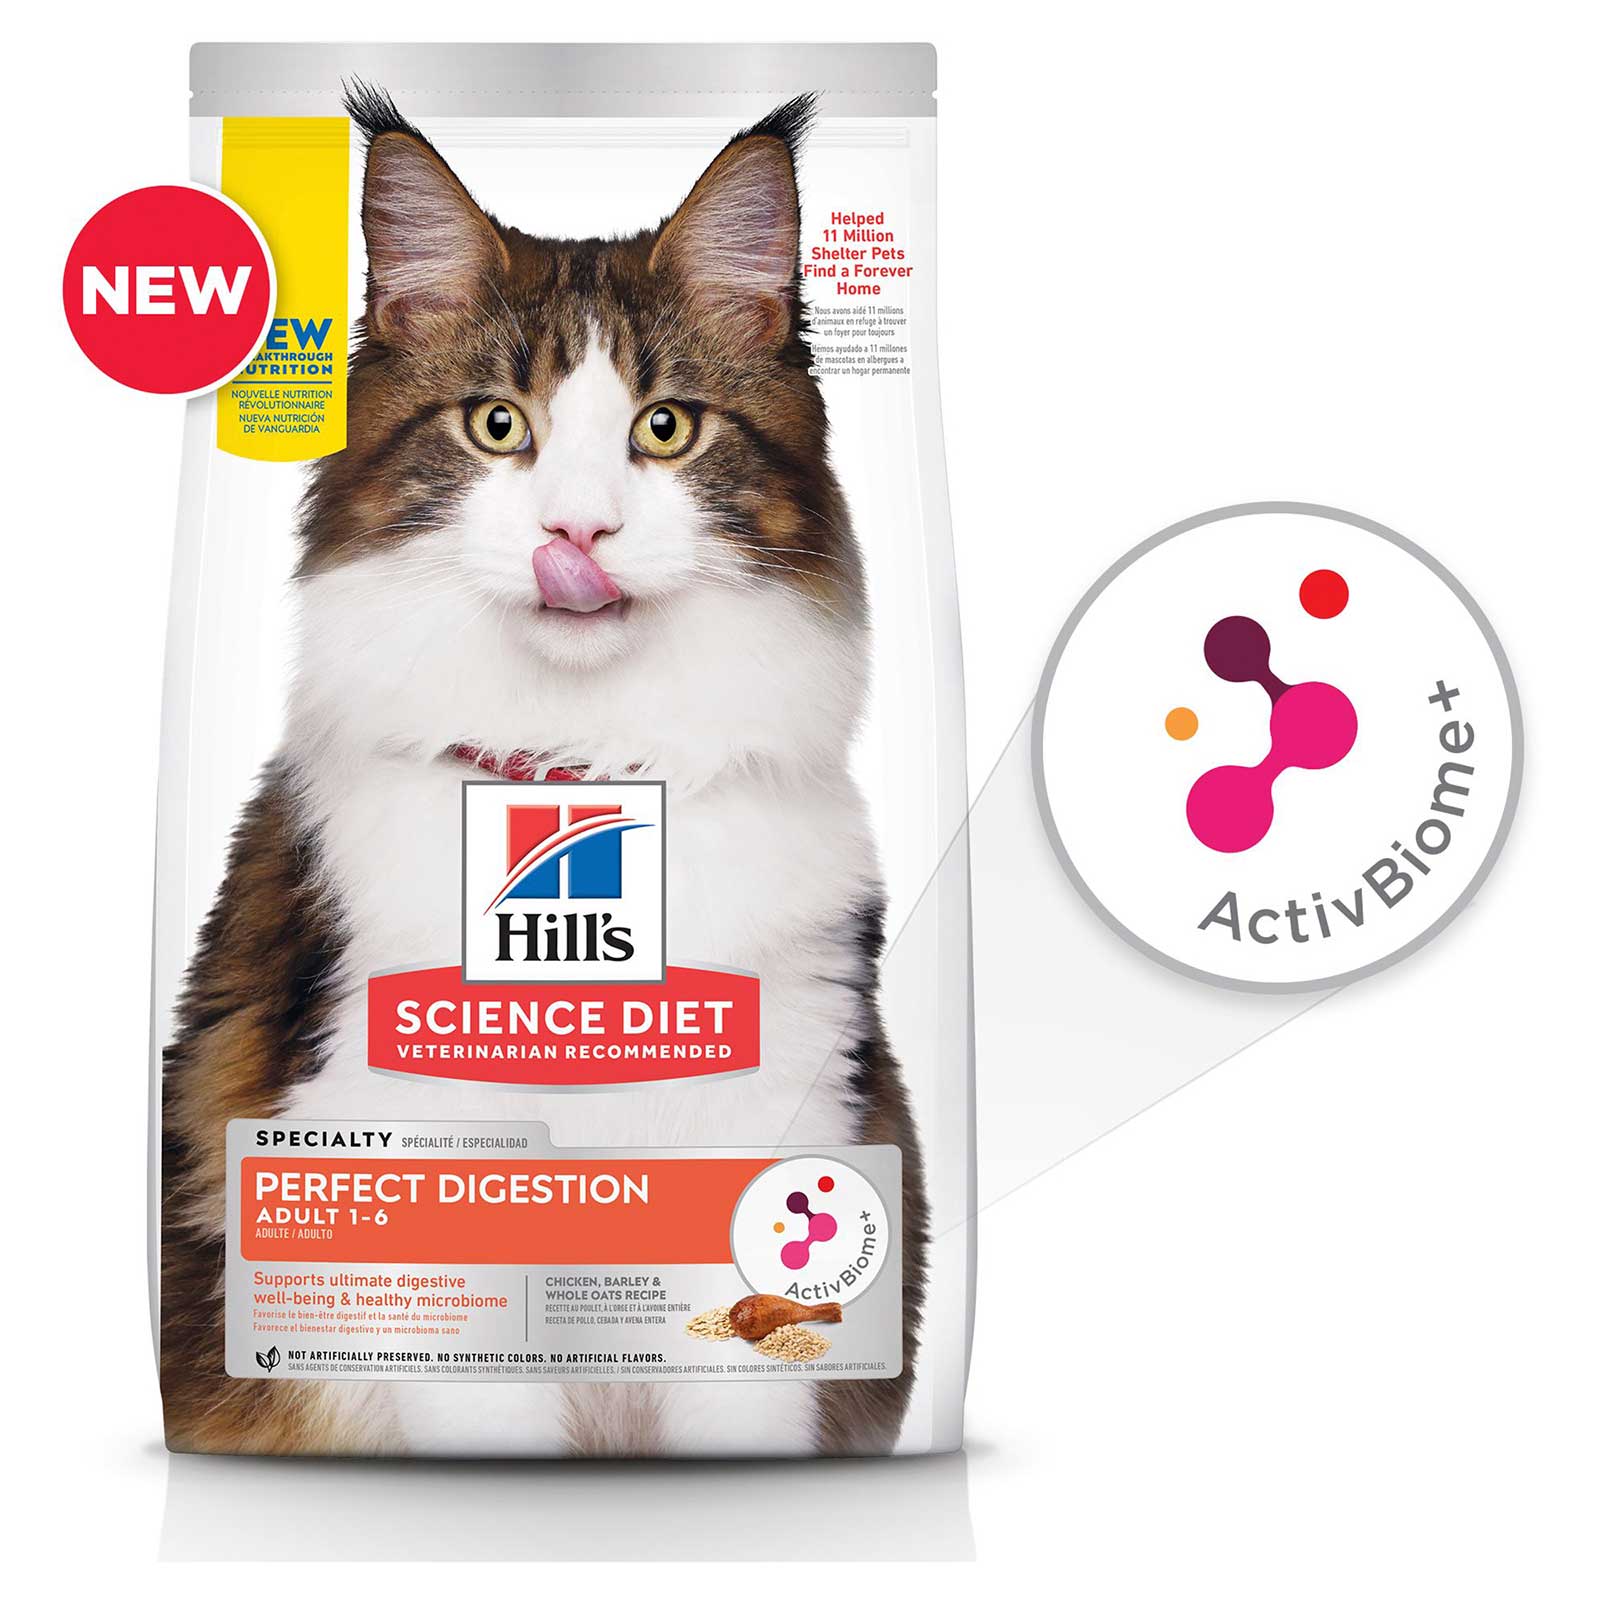 Hill's Science Diet Cat Food Adult Perfect Digestion